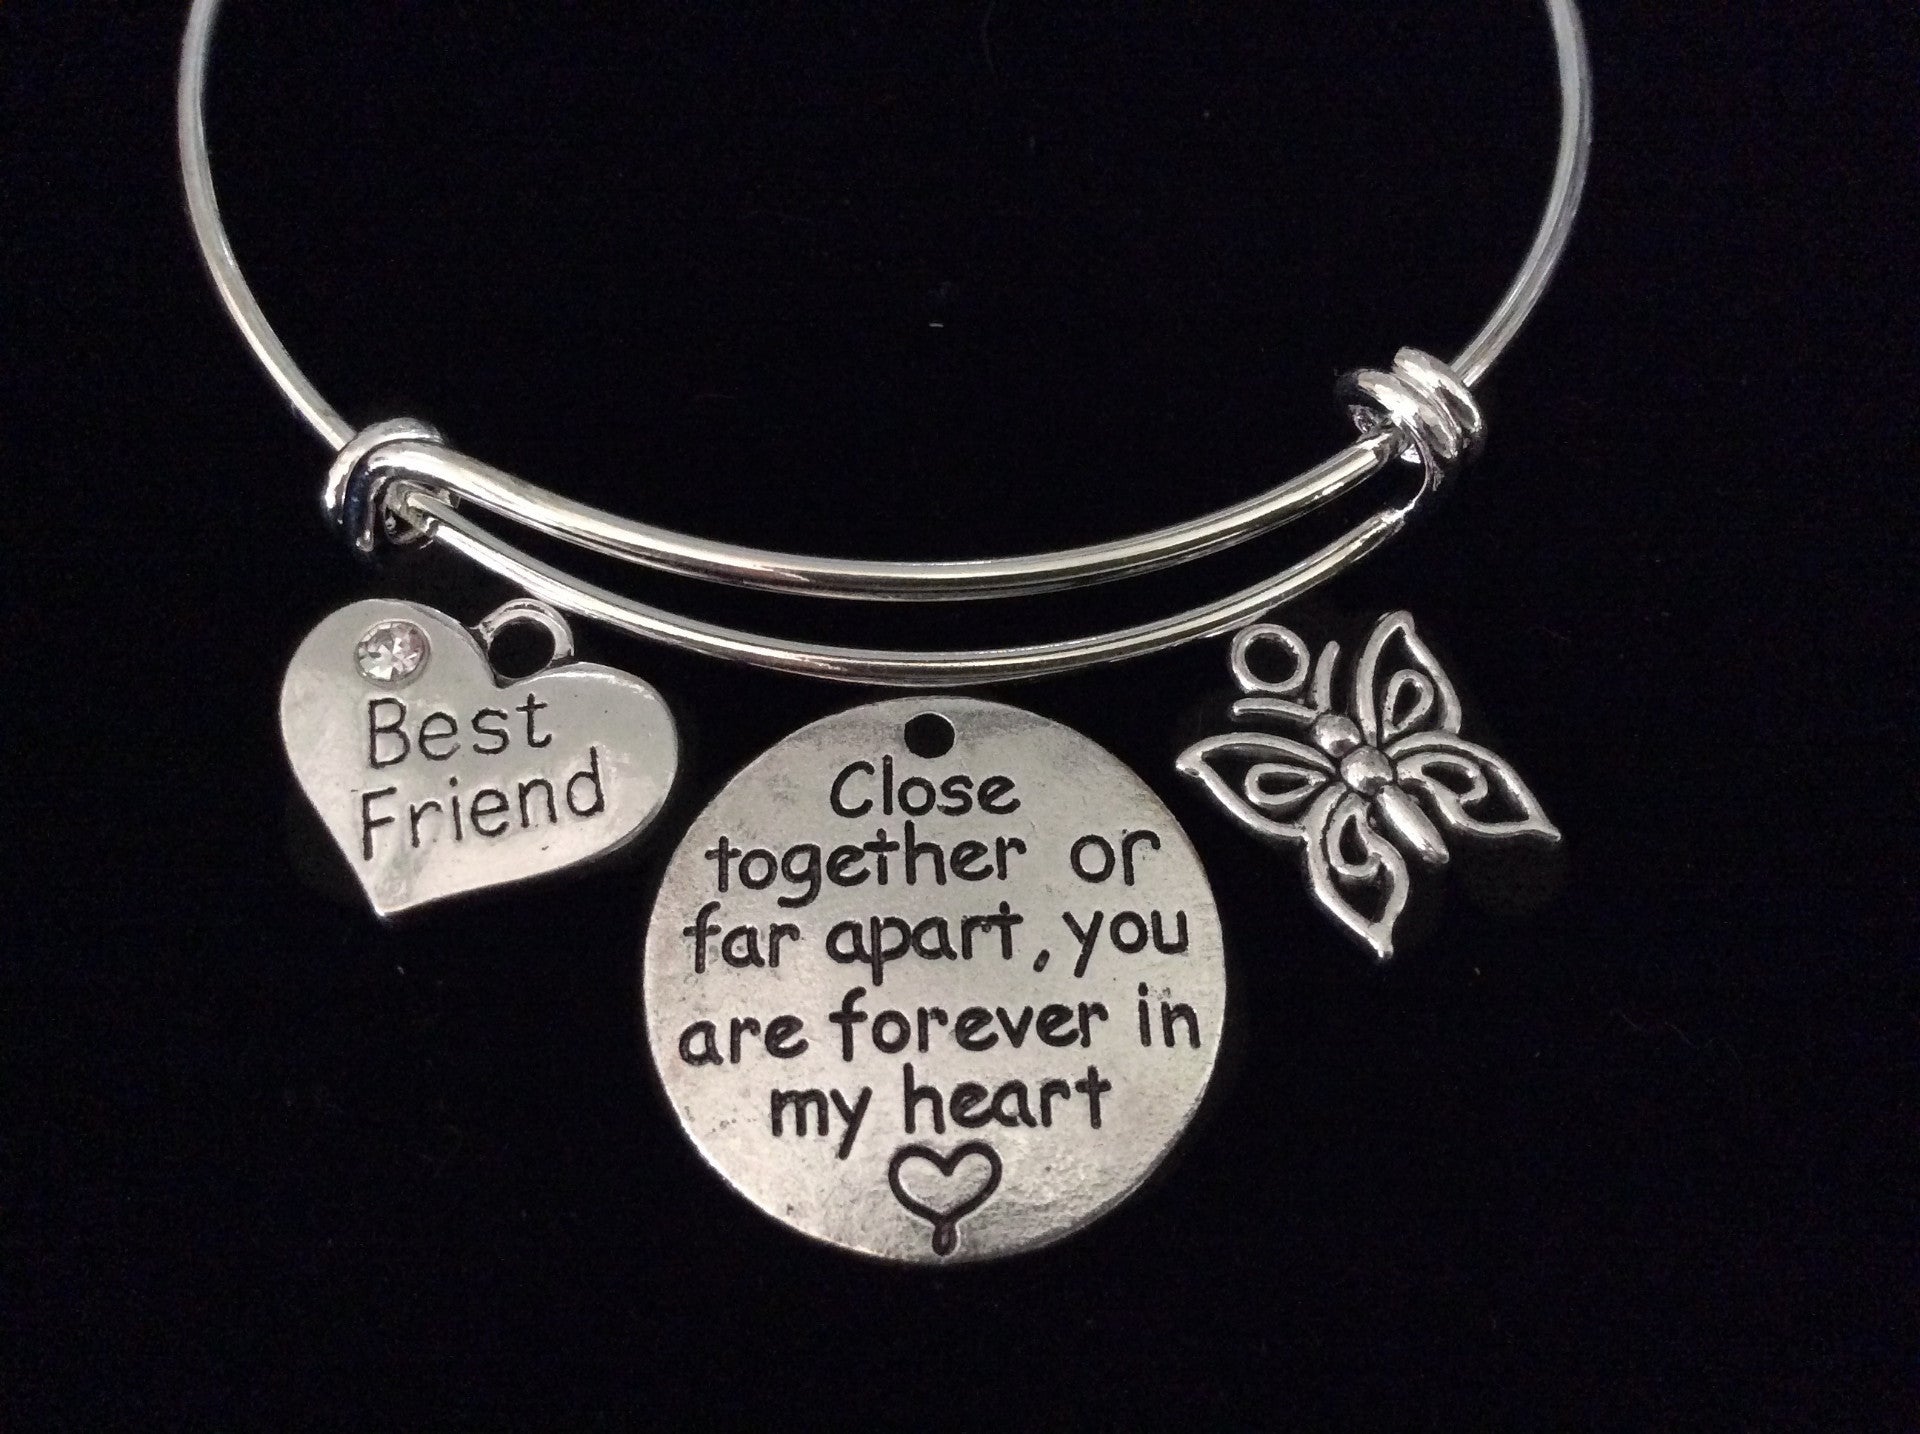 Hearts and Butterflies Charm Bracelet